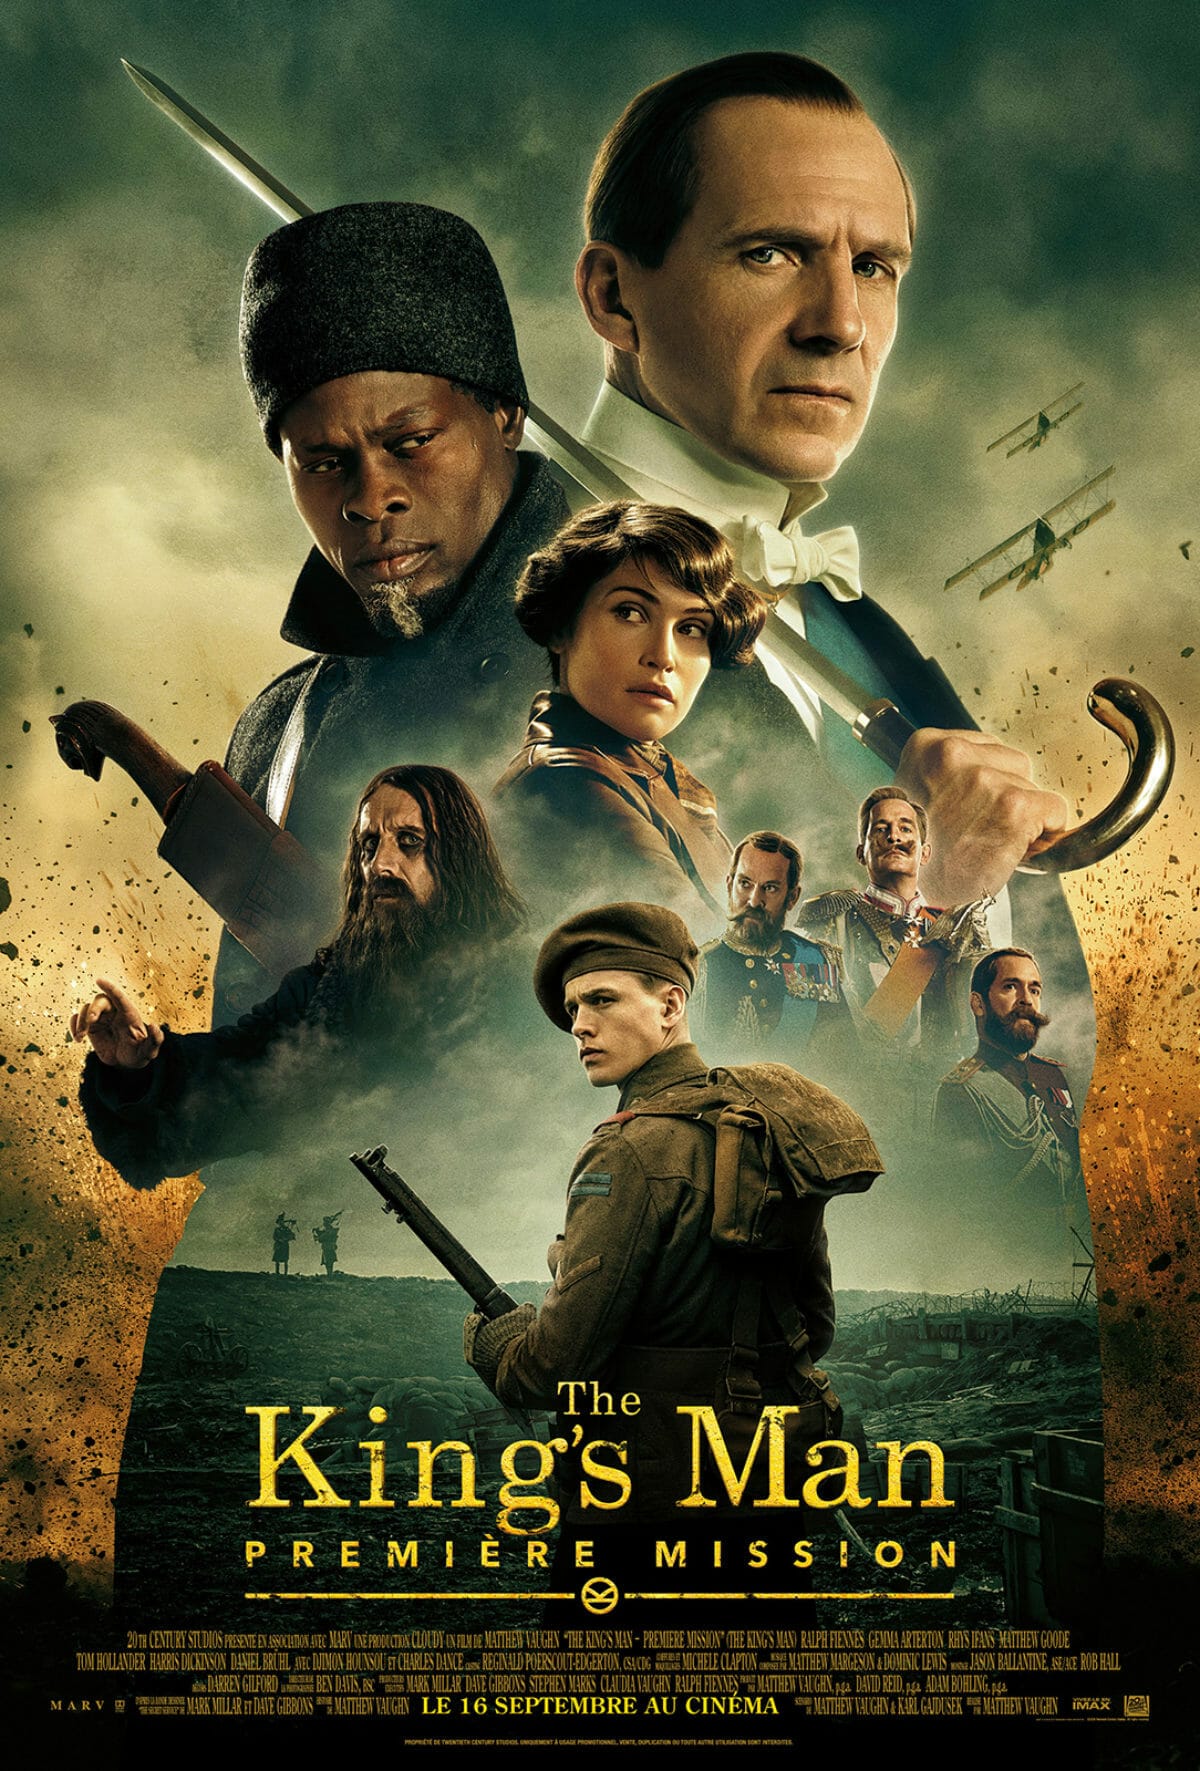 The-King's-Man-première-mission-poster